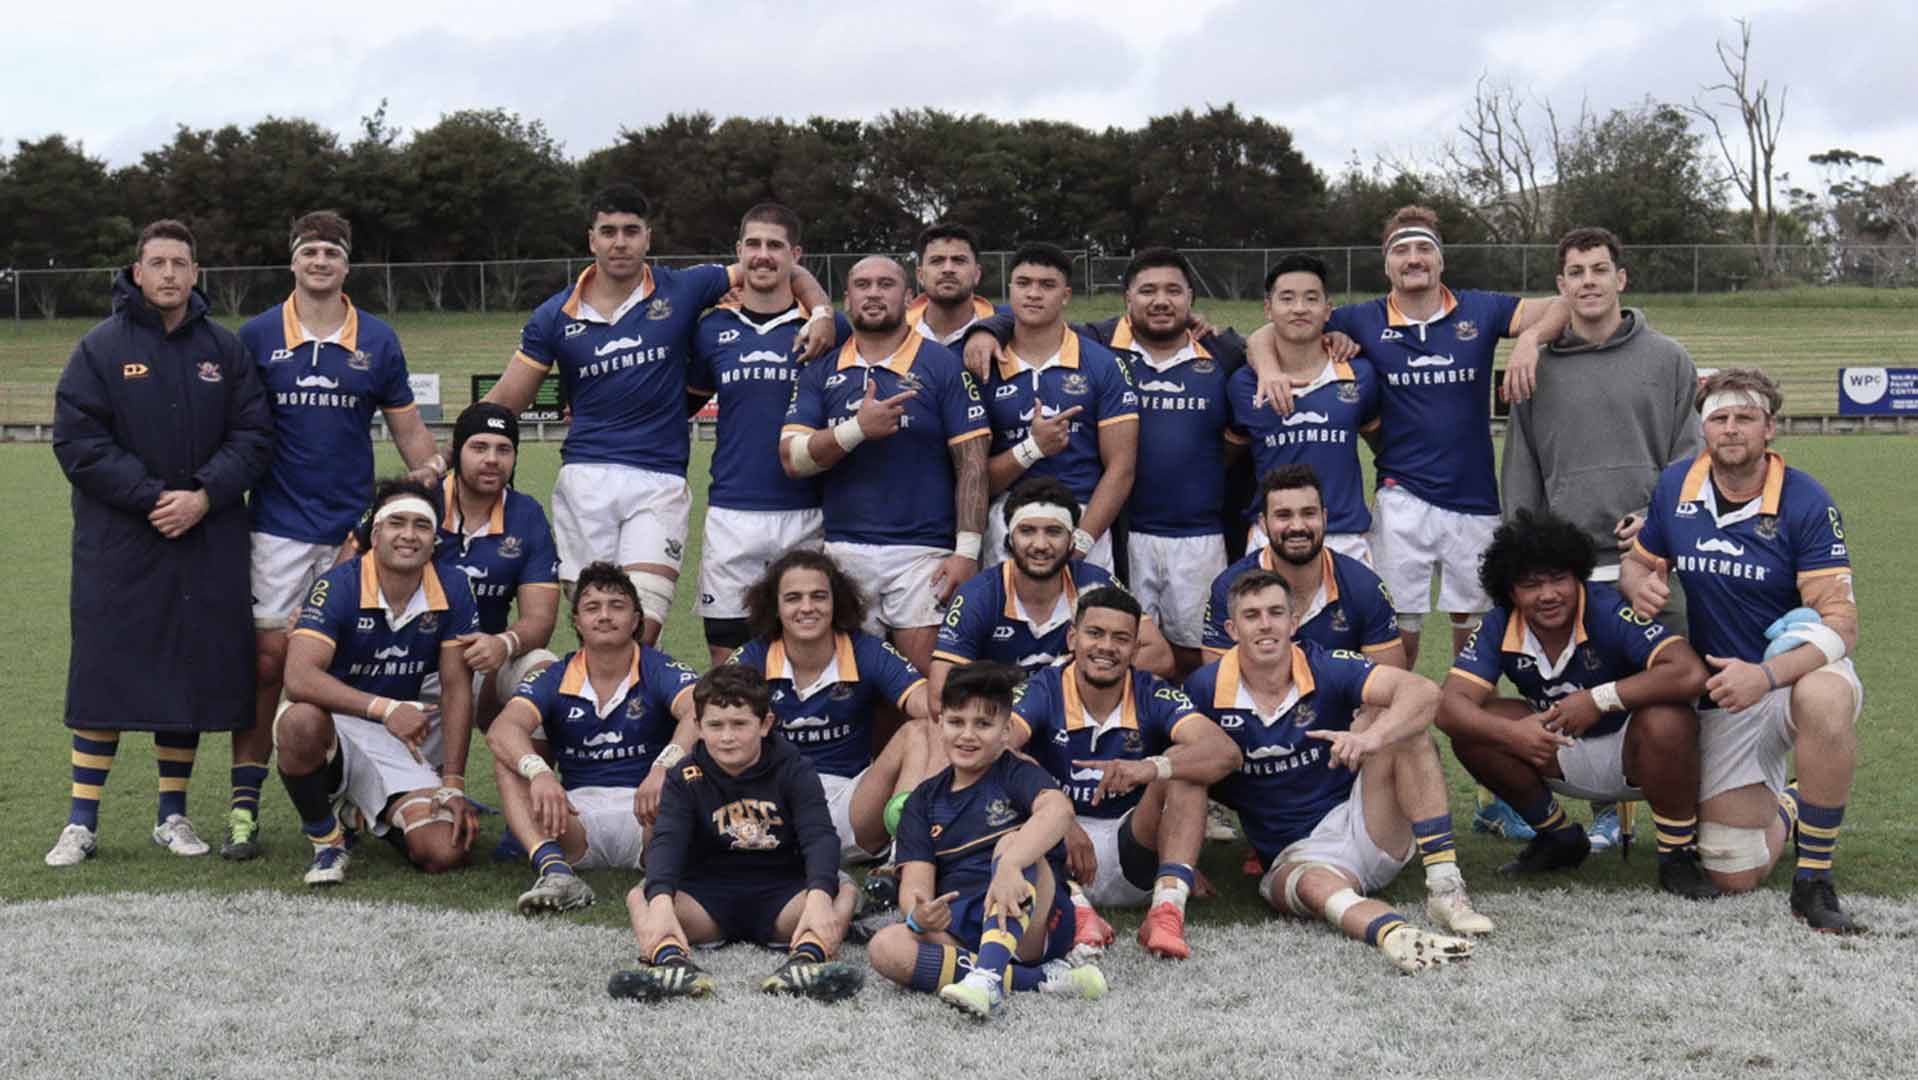 A rugby team posing for the camera, bedecked in Movember Sports Club-branded attire.